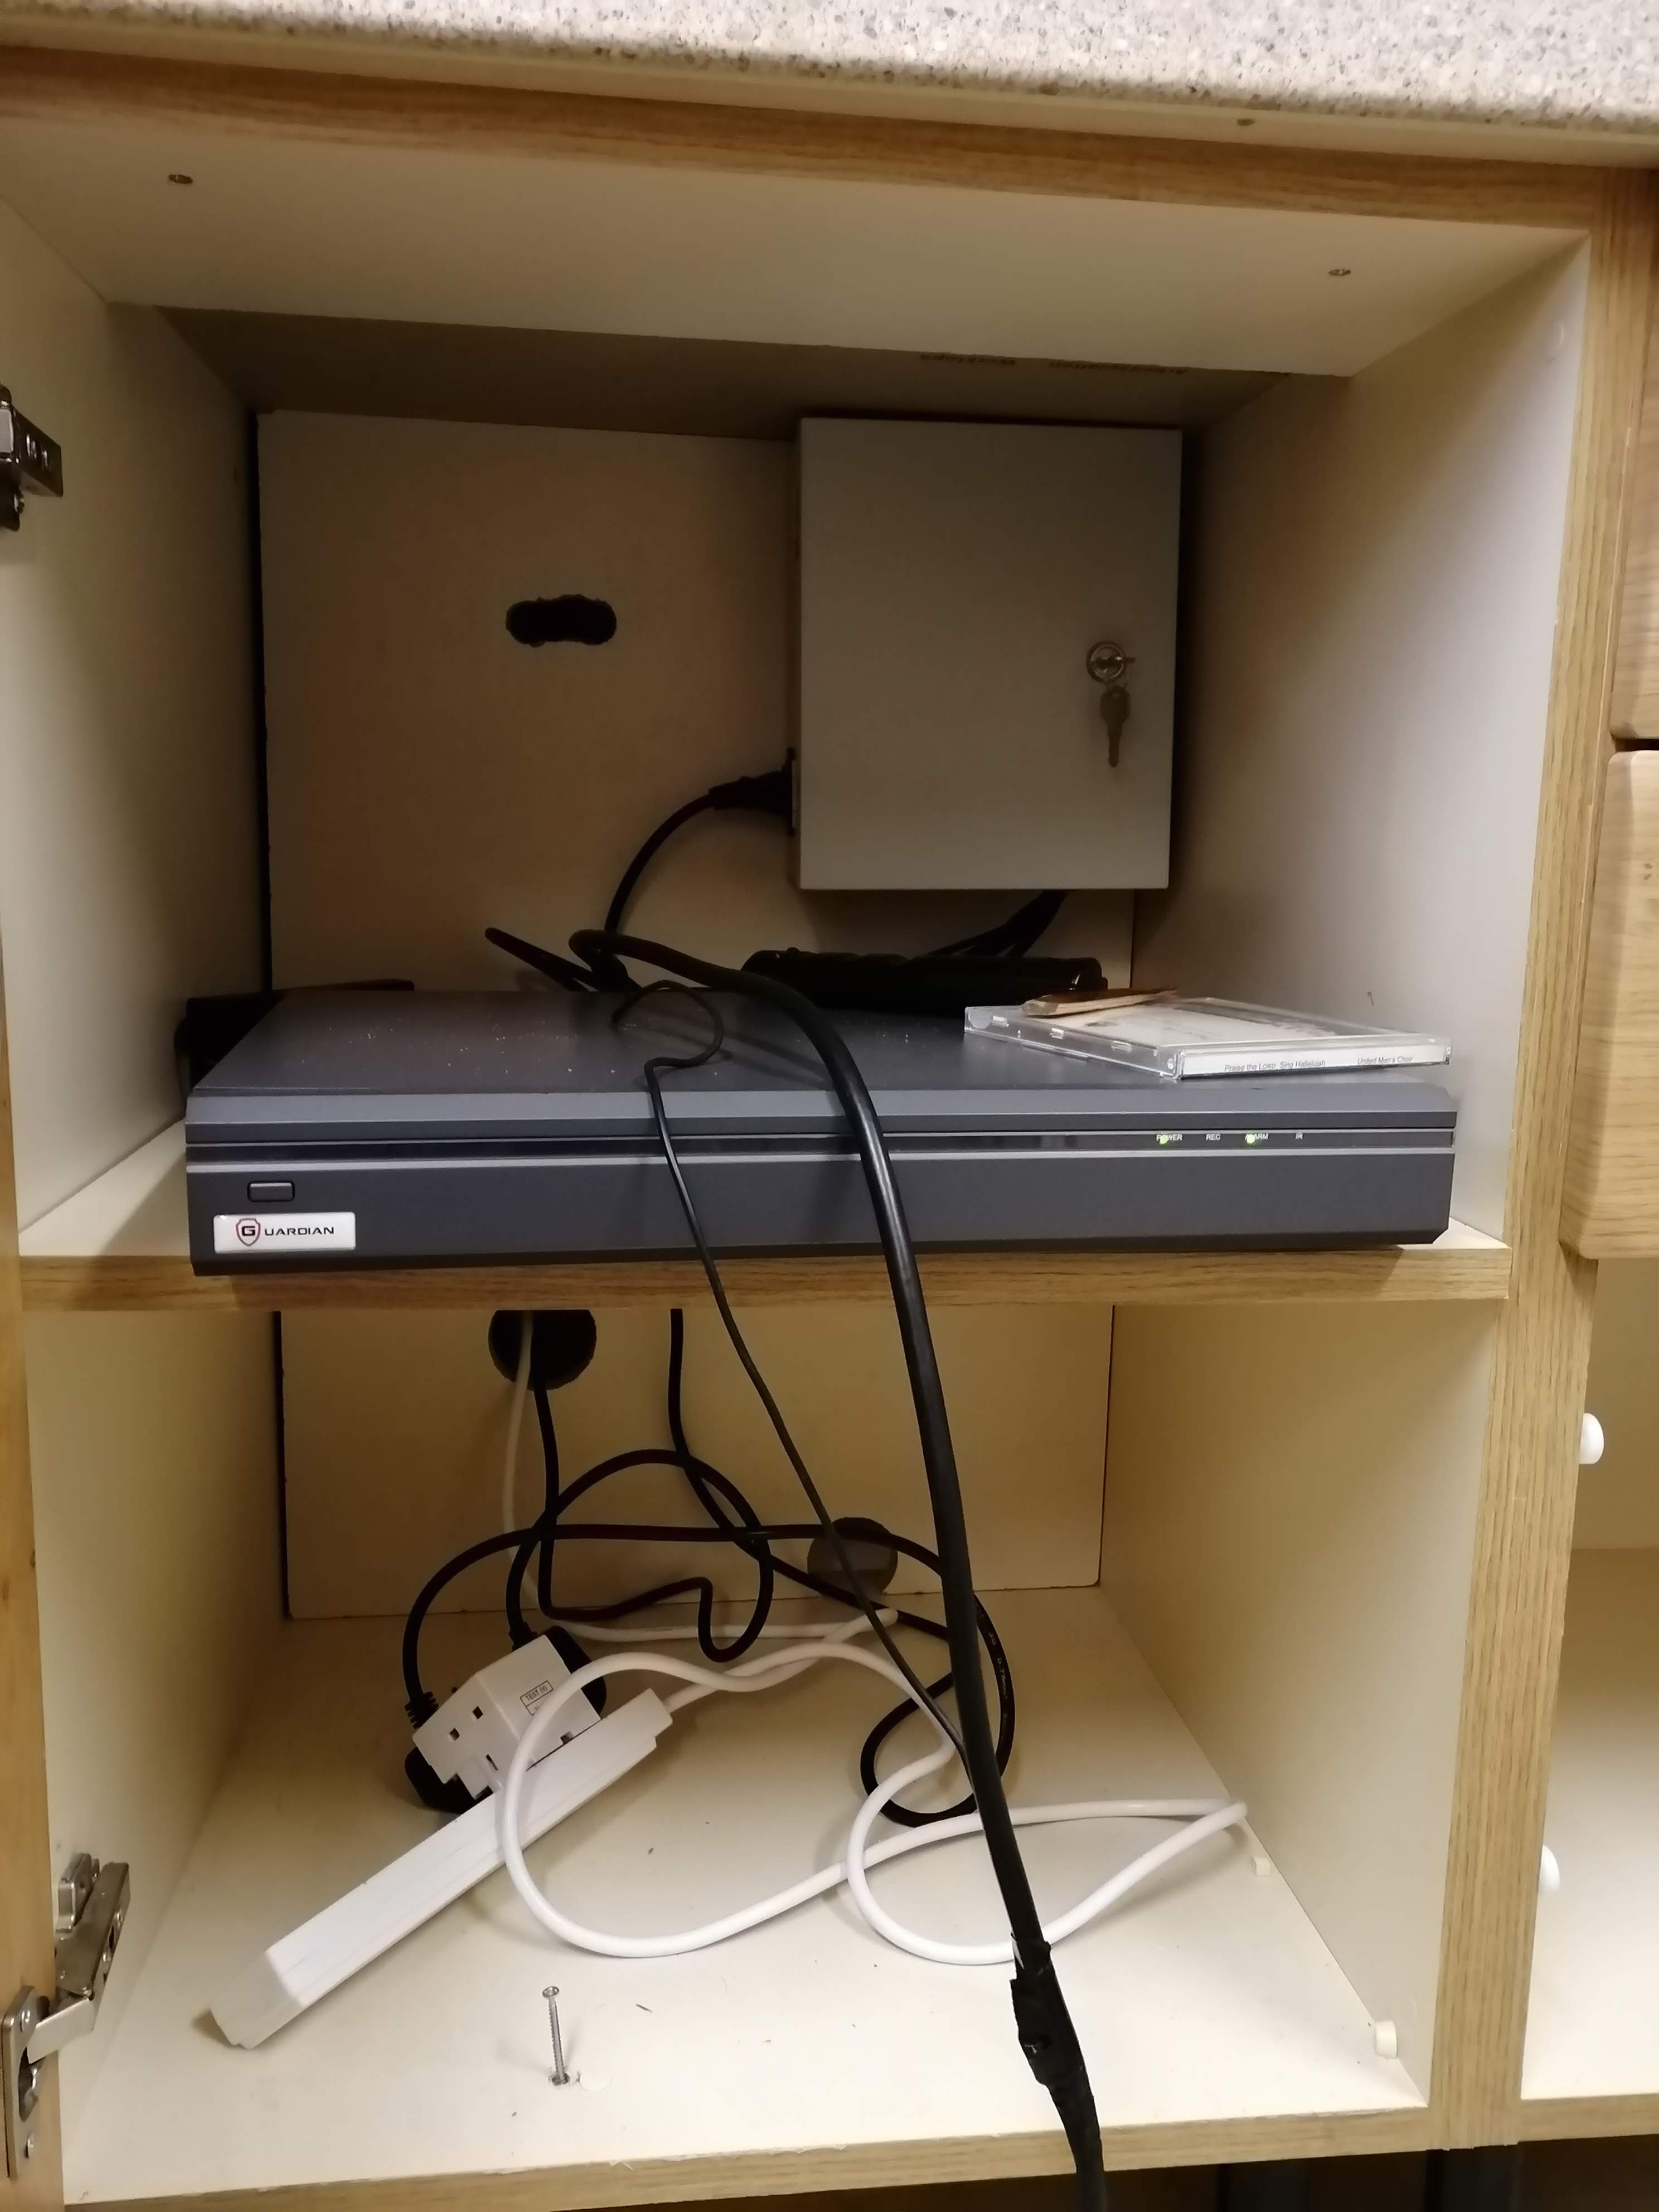 Kitchen built-in cupboard split in two by a shelf. The top shelf contains a CCTV DVR and a locked metal cabinet. The bottom shelf contains a number of cables.